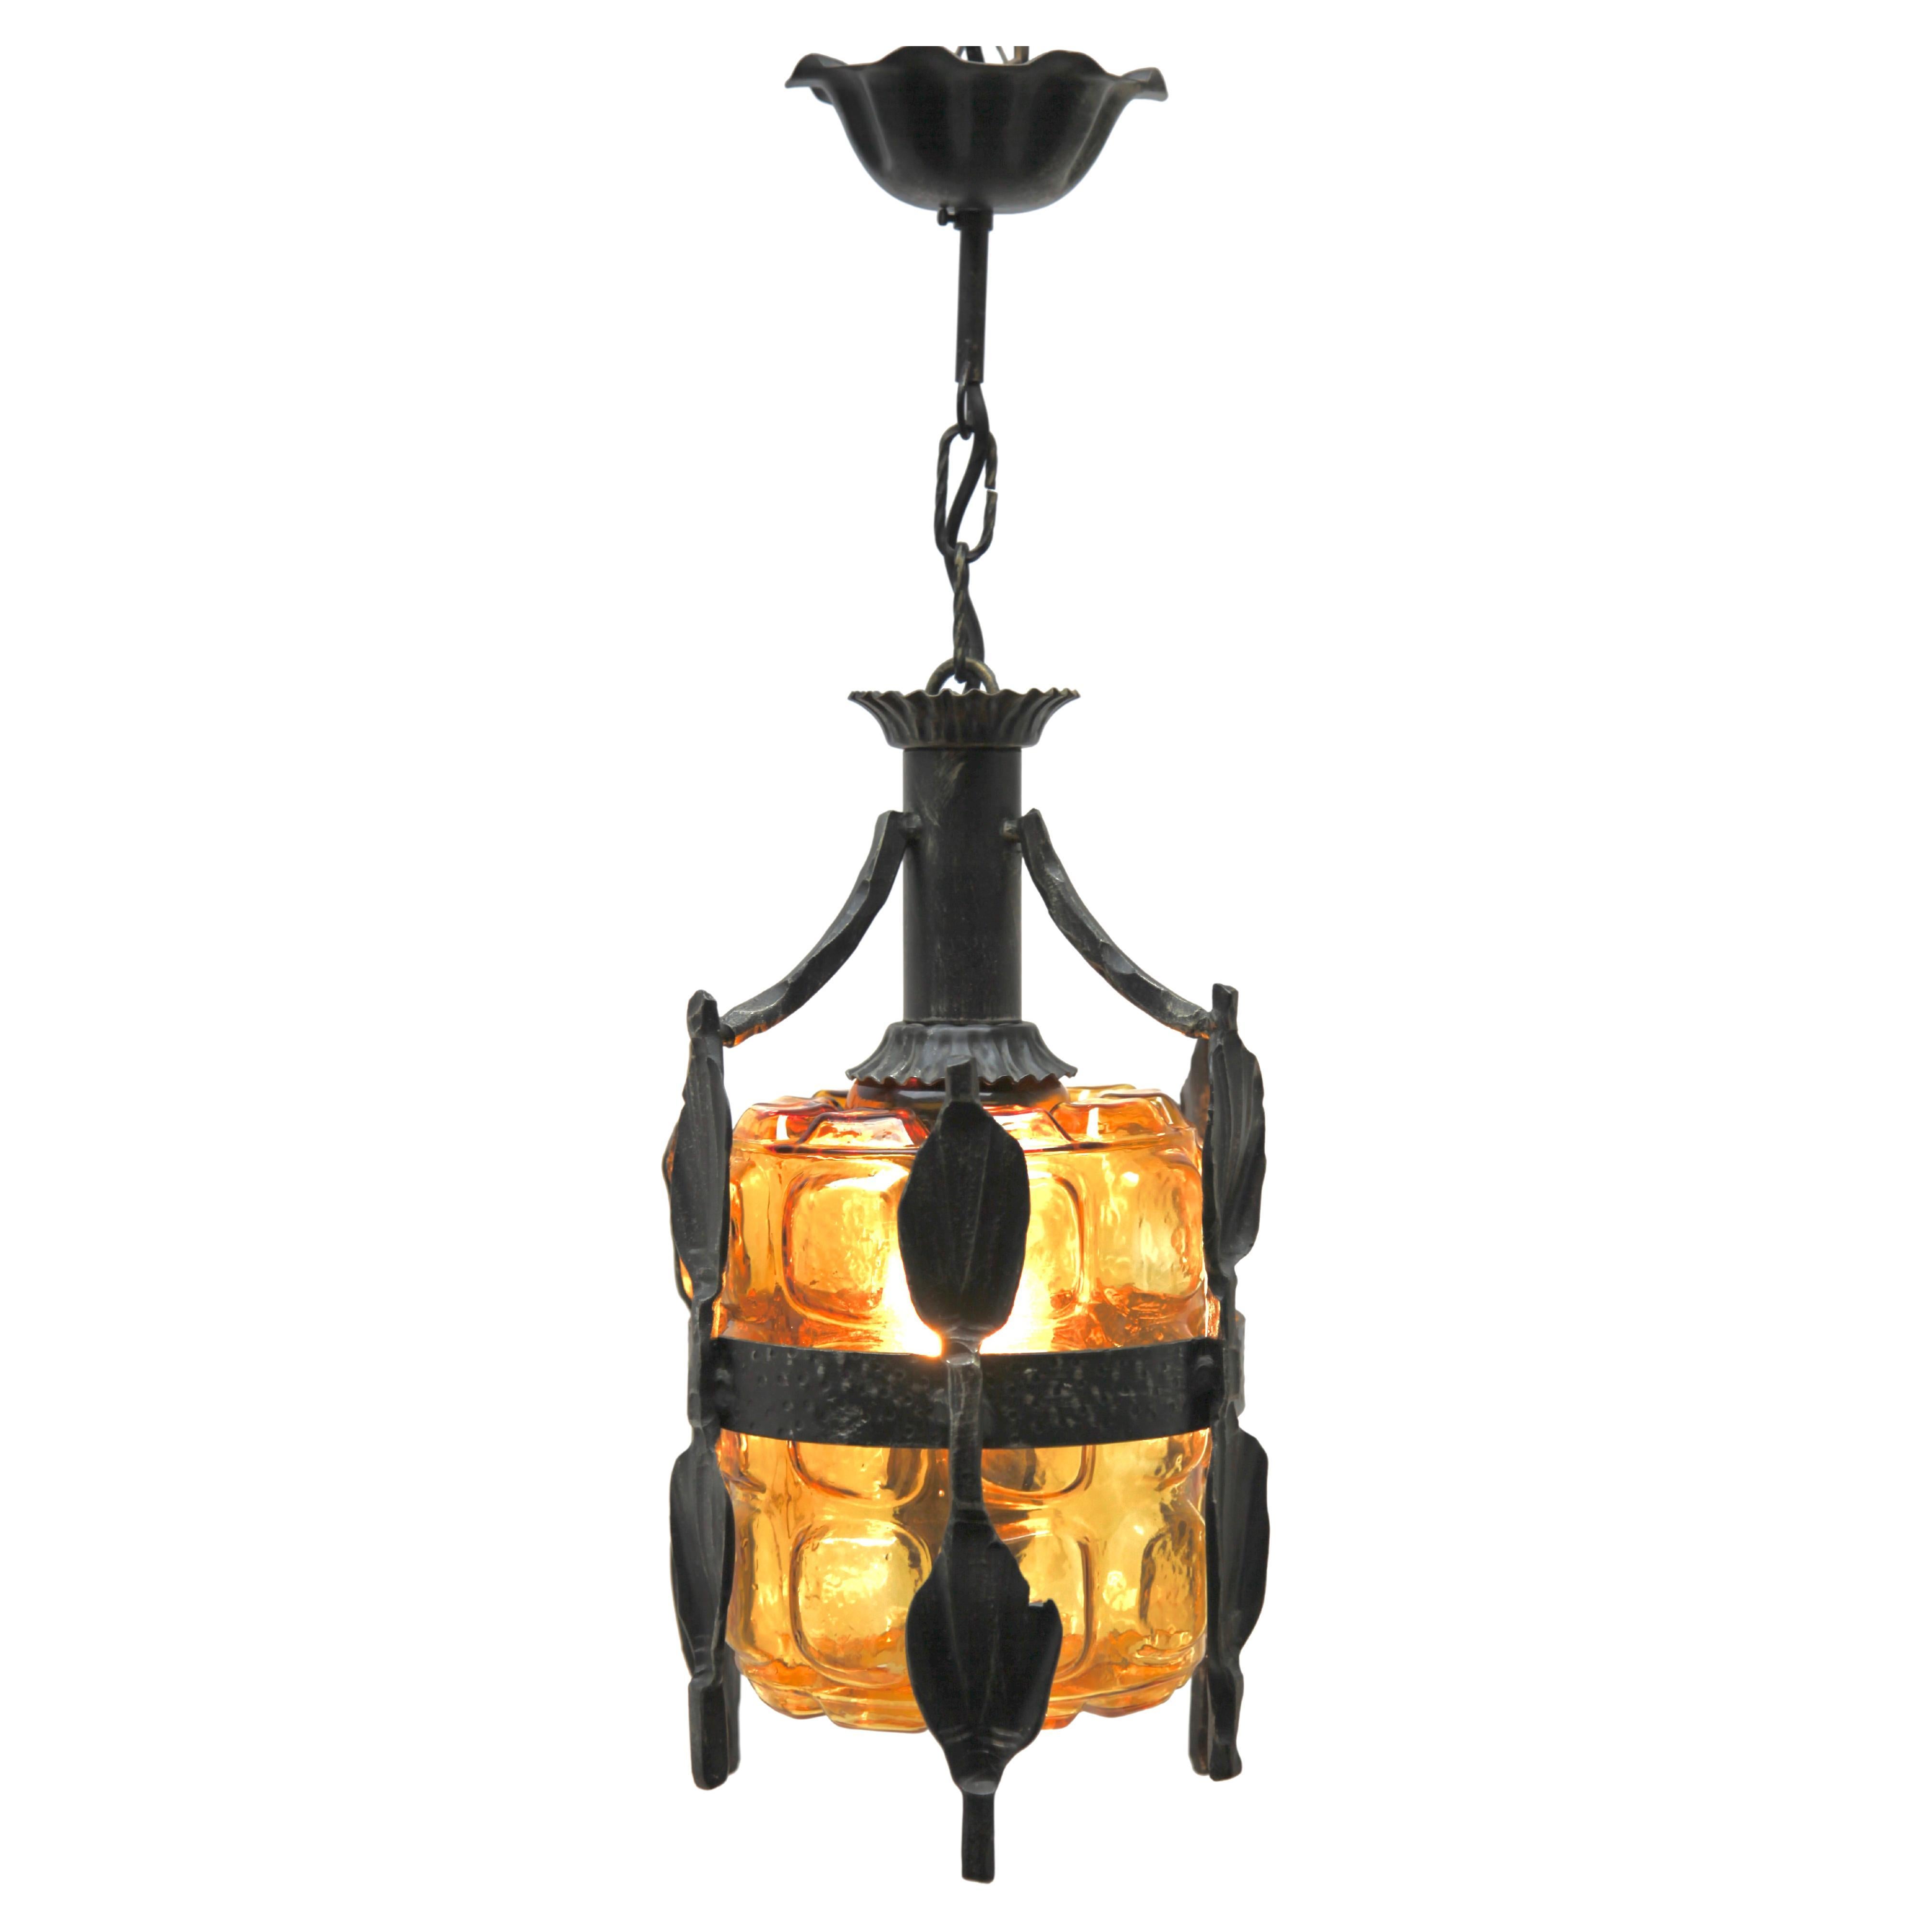 A Brutalist pandent Lantern Sweden circa 1960s 
3 units available Price per unit

As service: We can adjust the lamp height for you in advance if needed 
Beautiful when lit.
And safe for immediate usage in the World.

Mounted on the ceiling and give